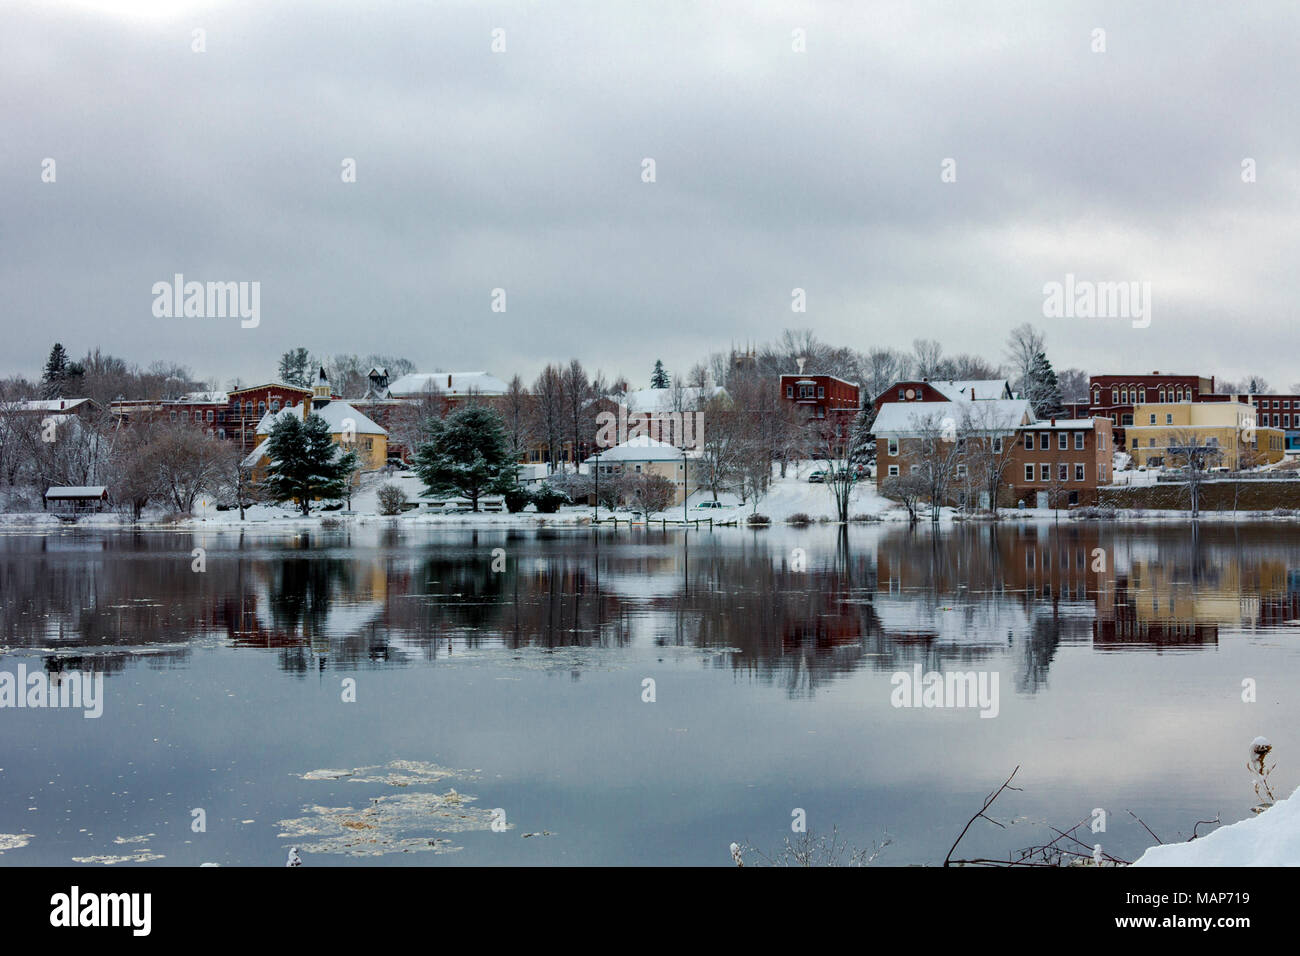 View of Calais, Maine across the US/Canada border from St. Stephen, New Brunswick, in winter with snow and cloudy skies Stock Photo